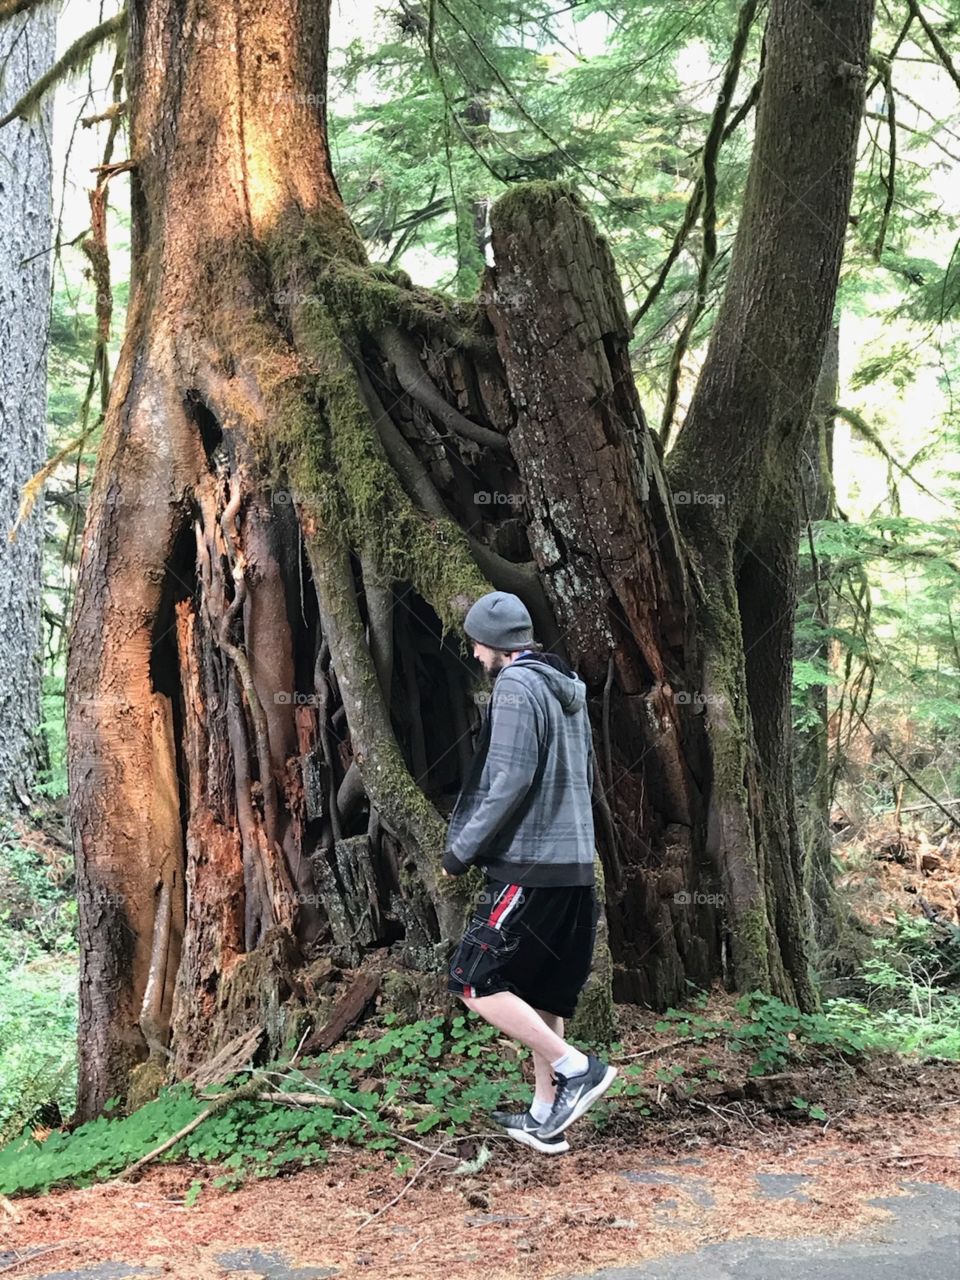 Another pic at the cool tree/s